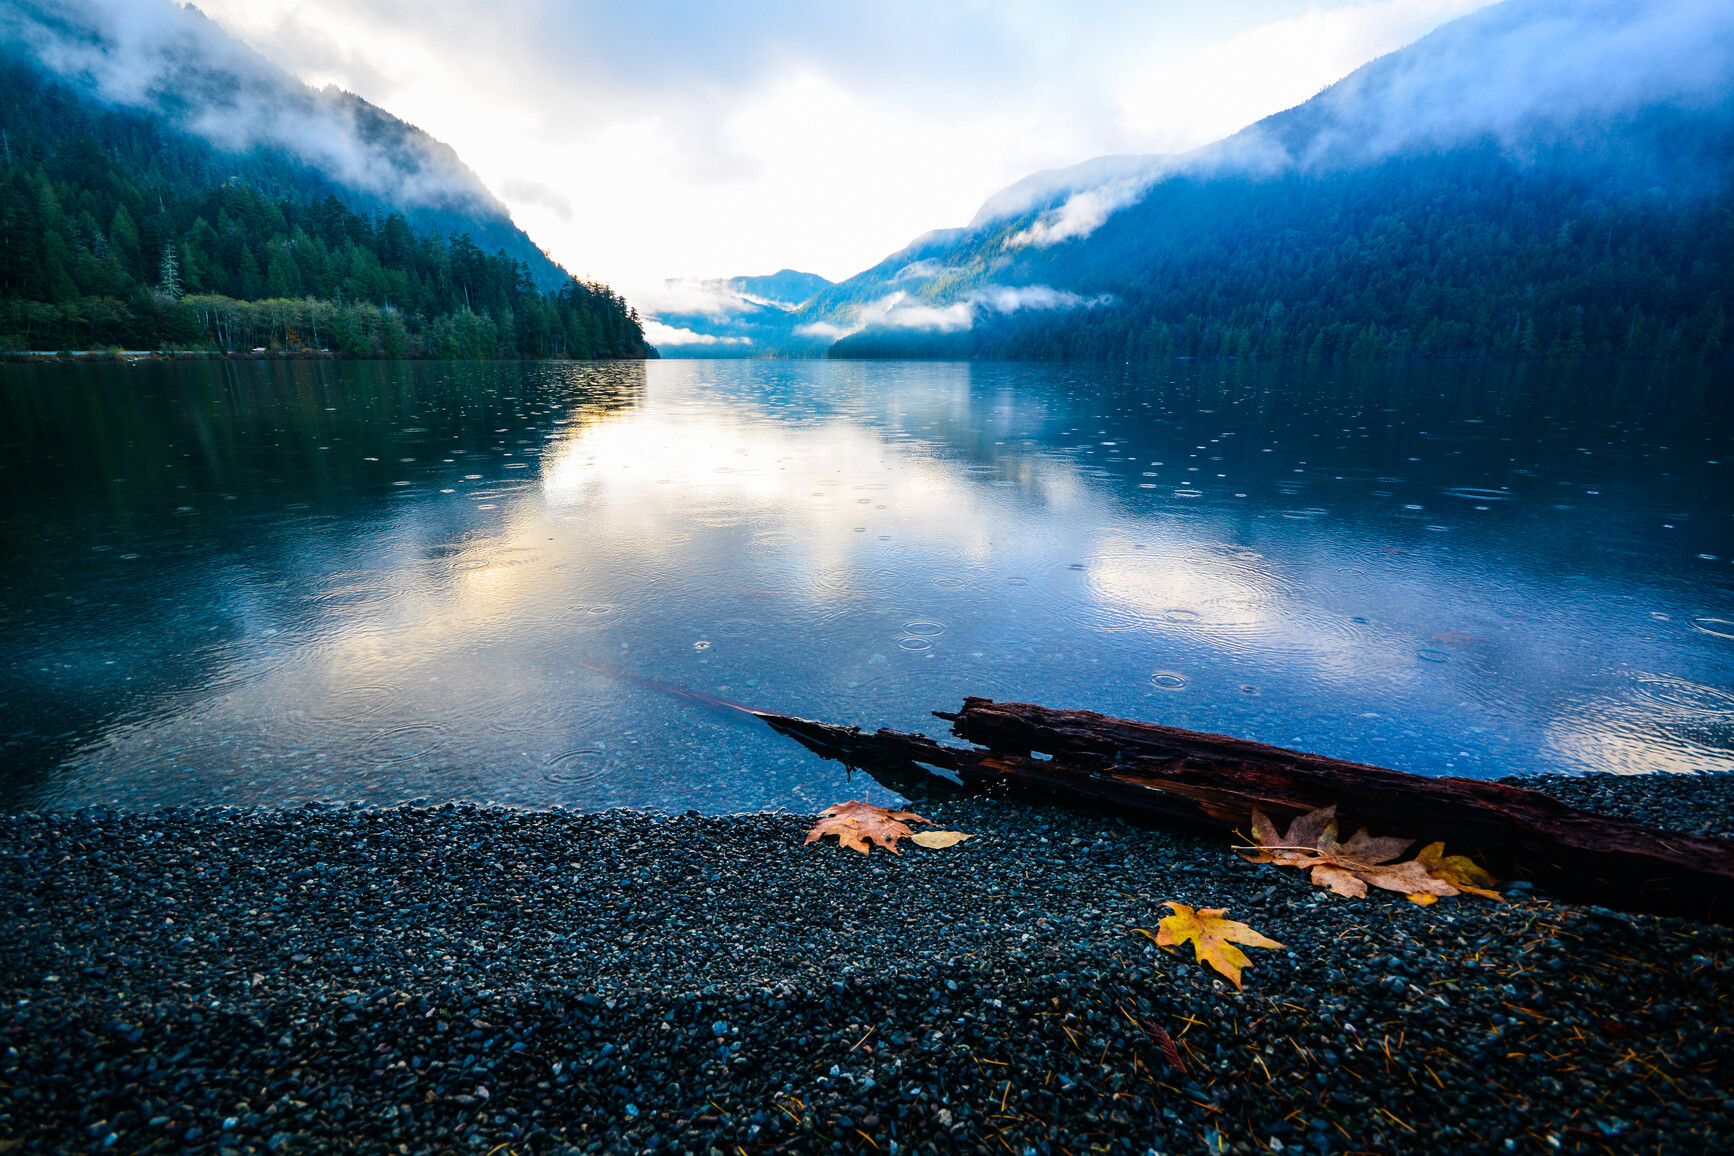 View of lake and mountains. Rings from rain drops can be seen in the lake. Fallen maple leaves and log in foreground on the beach.